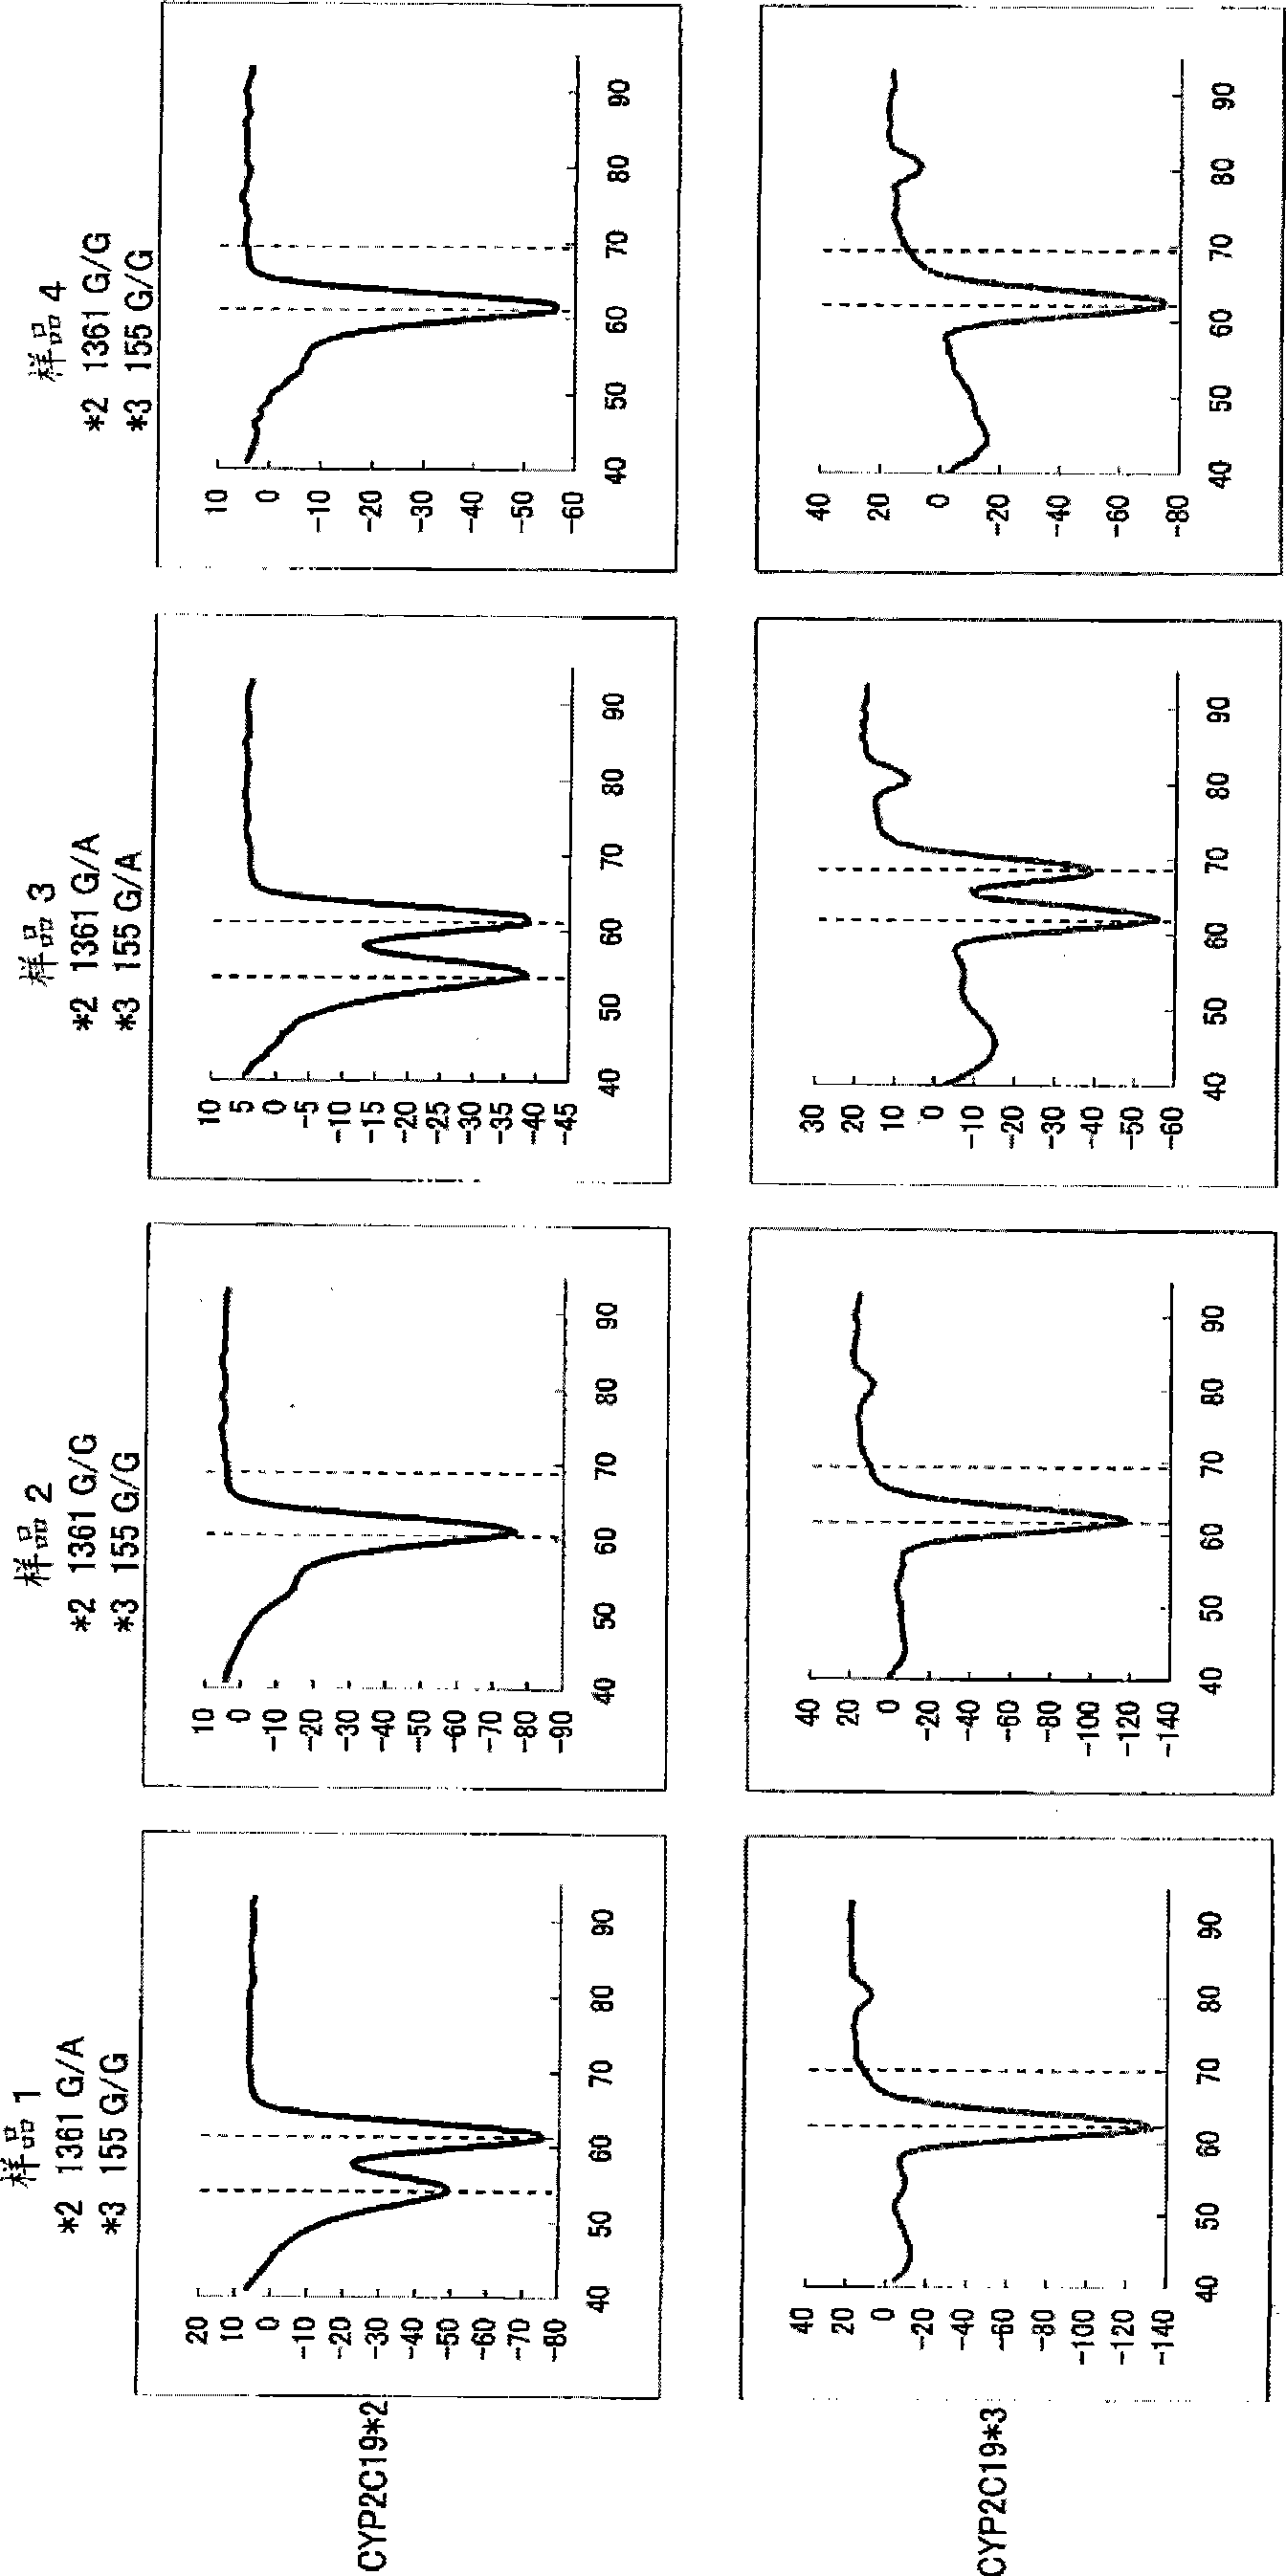 Primer set for amplification of CYP2C19 gene, reagent for amplification of CYP2C19 gene comprising the same, and use of the same